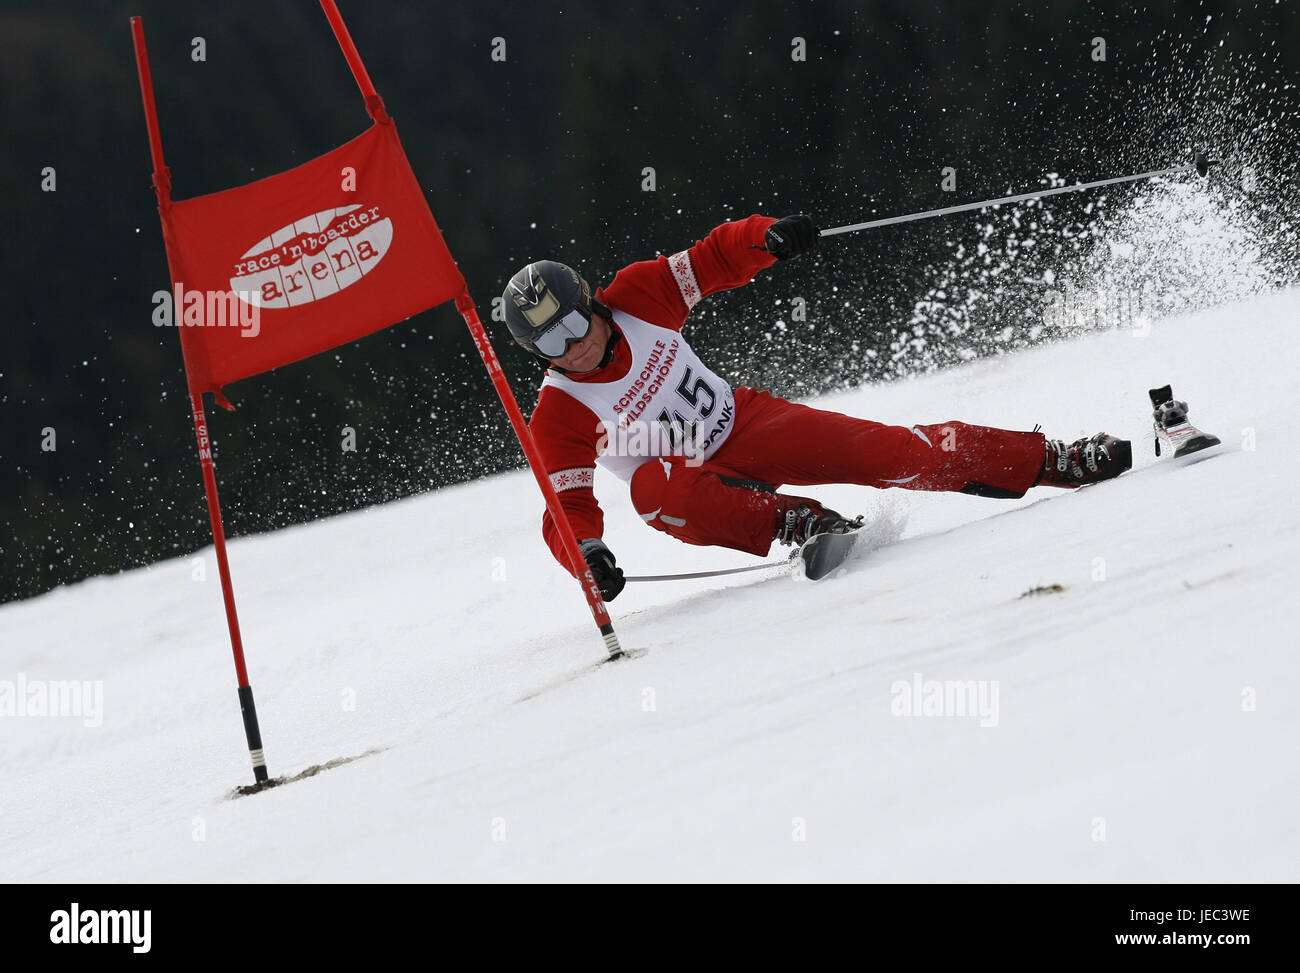 Ski racing runner loses a ski during a race, Stock Photo